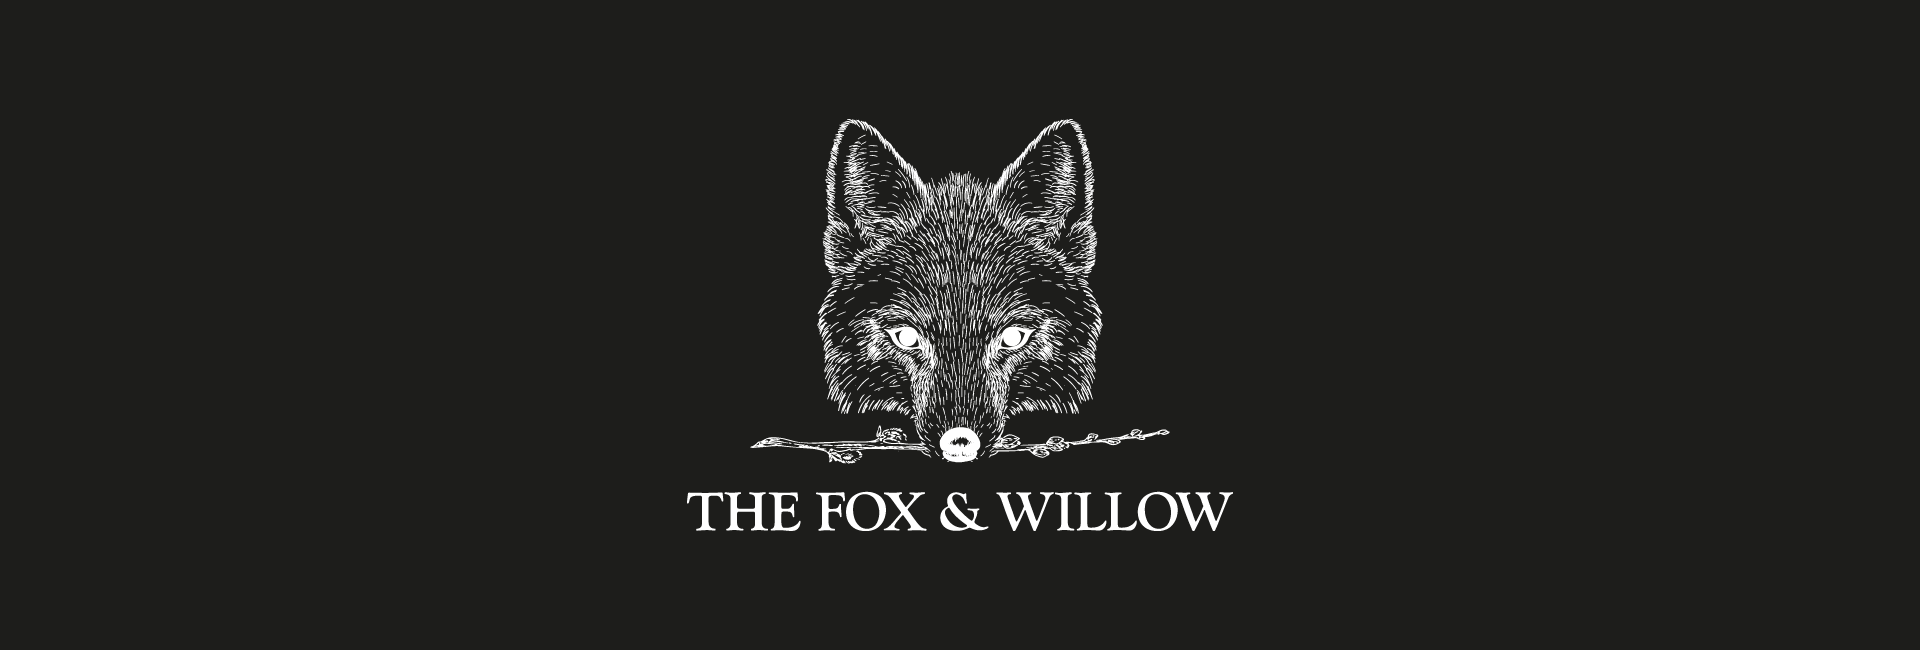 a black and white drawing of a fox with the words the fox & willow below it